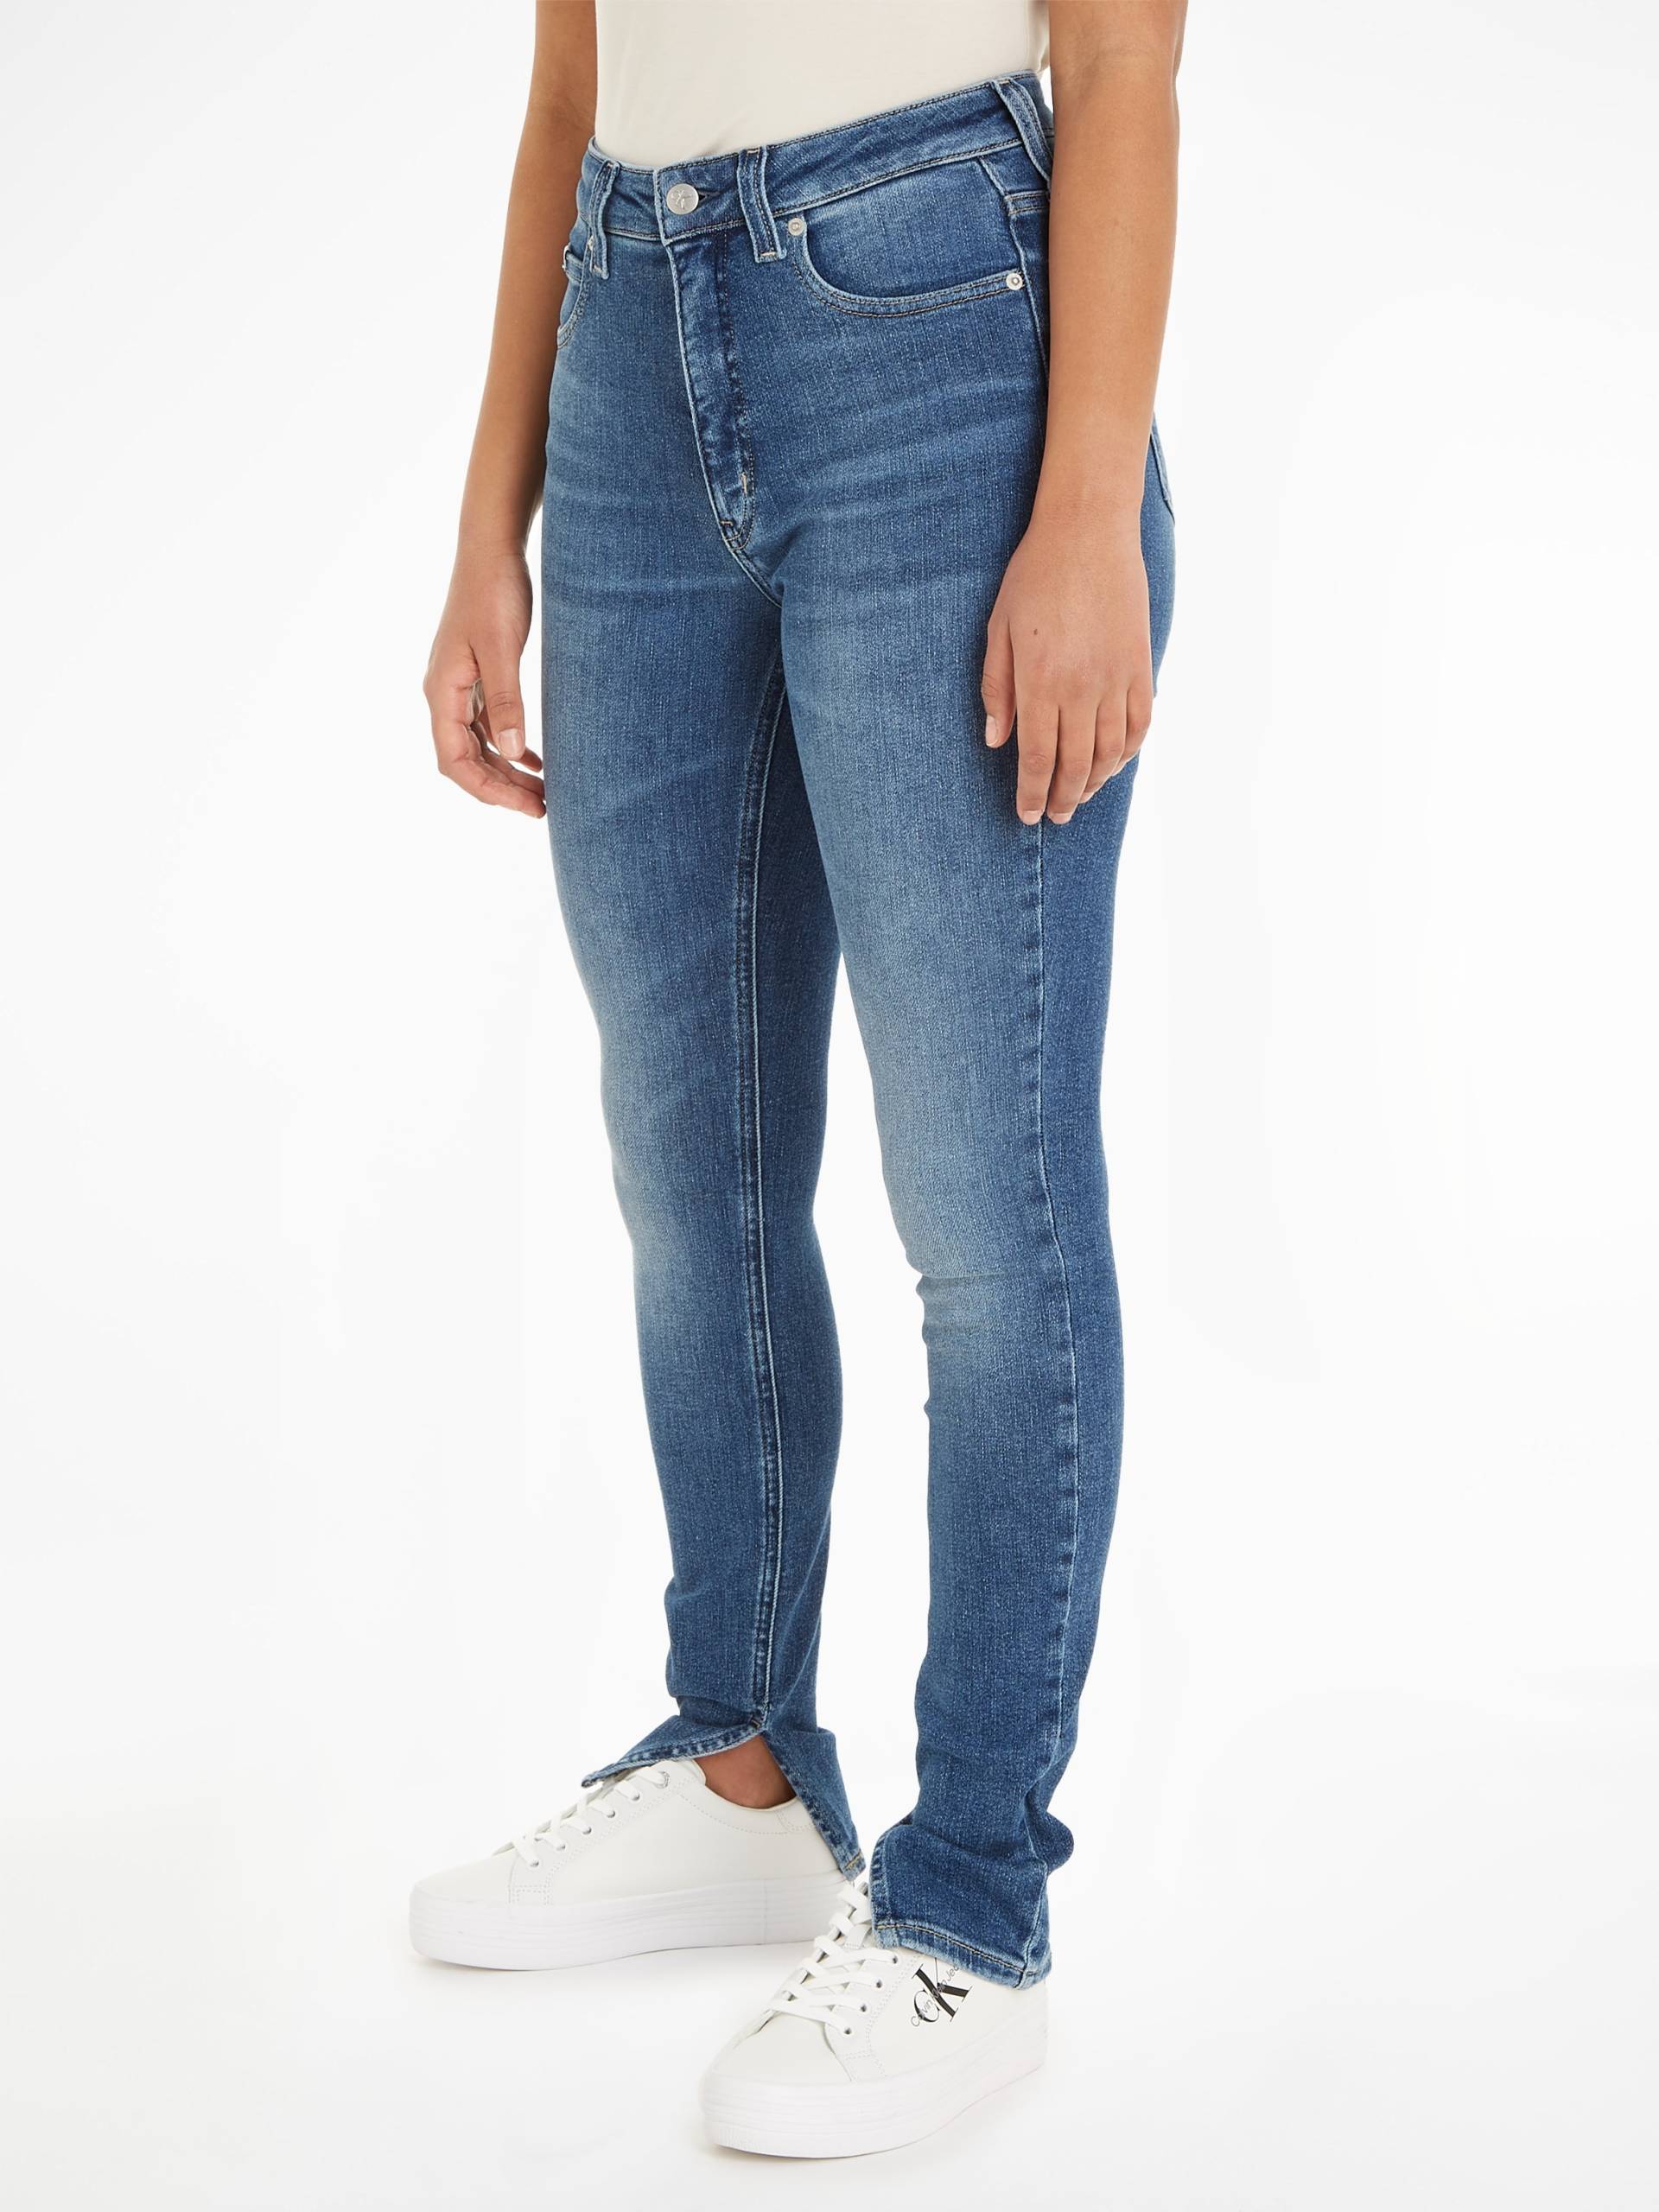 Calvin Klein Jeans Skinny-fit-Jeans »HIGH RISE SUPER SKINNY ANKLE« von Calvin Klein Jeans